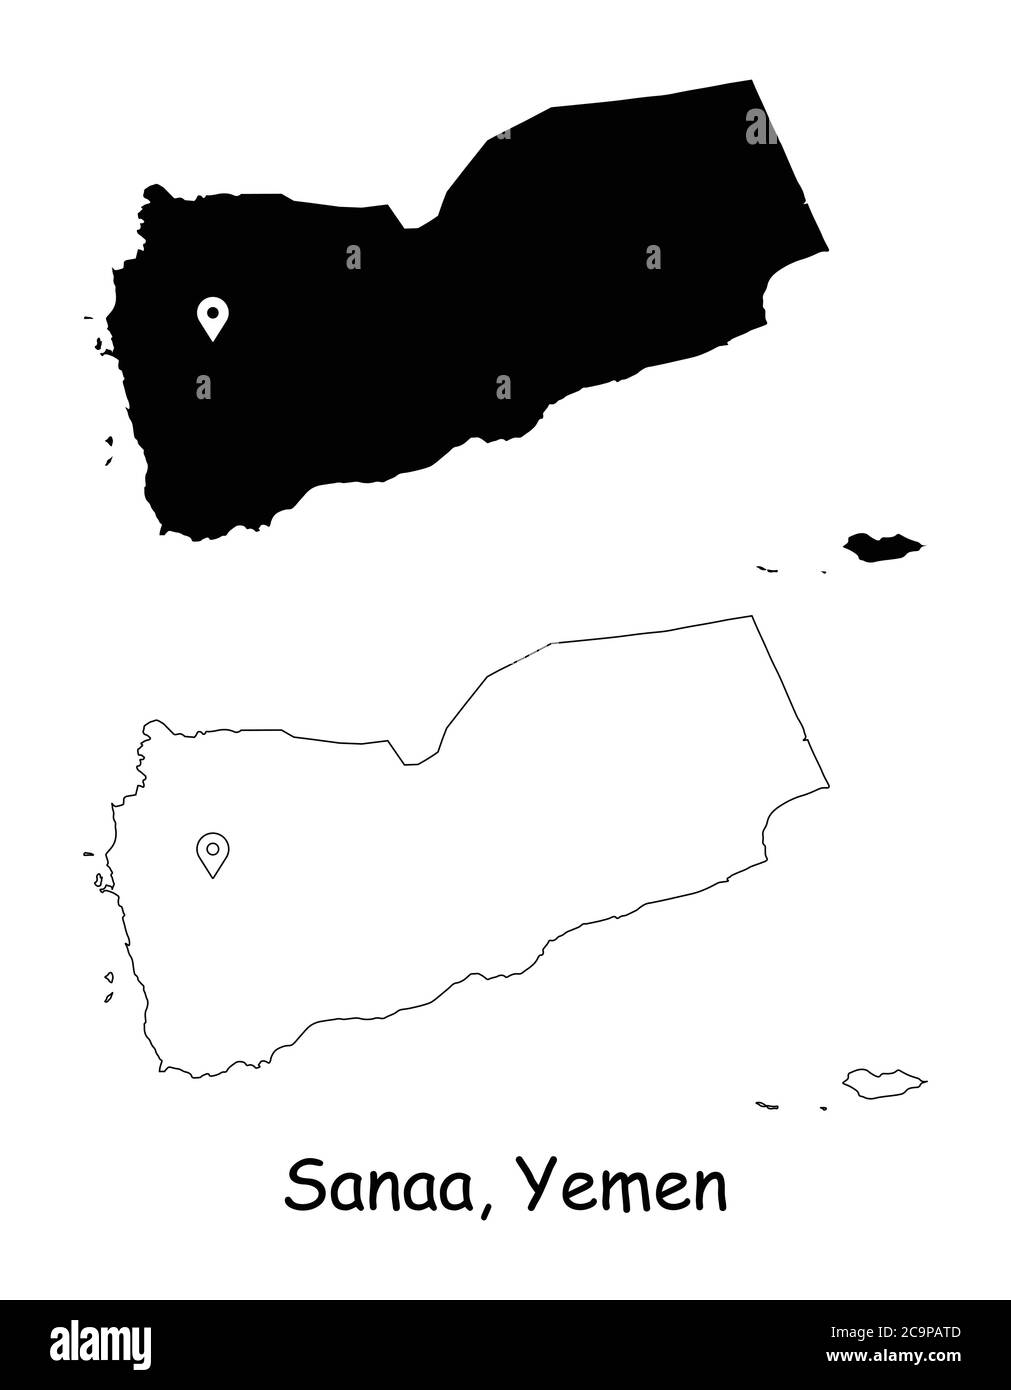 Sanaa, Yemen. Detailed Country Map with Location Pin on Capital City. Black silhouette and outline maps isolated on white background. EPS Vector Stock Vector